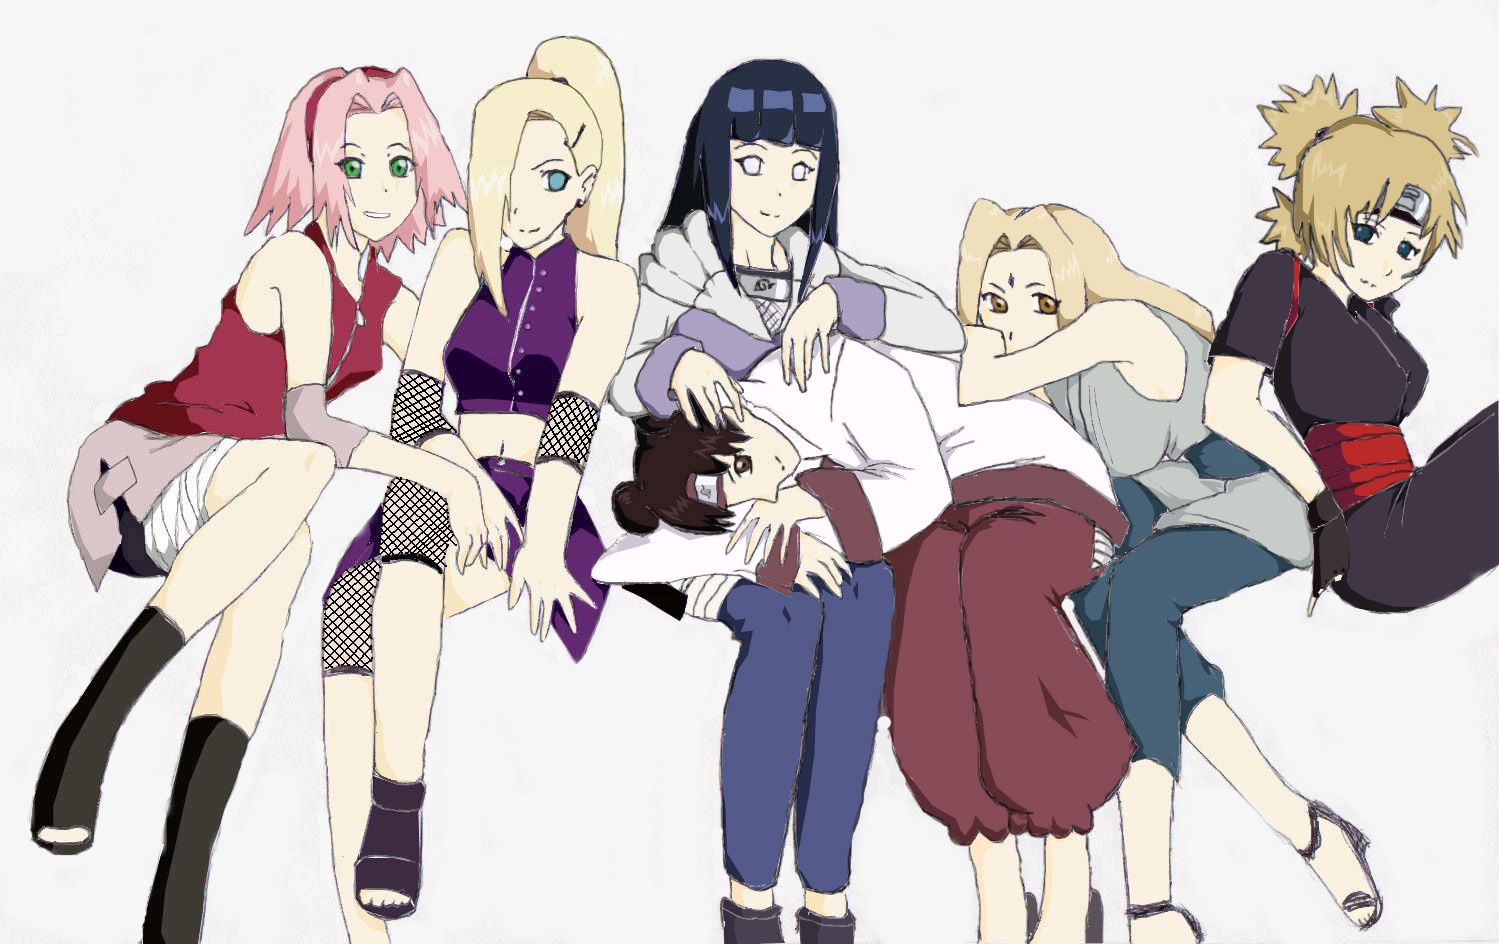 What Naruto Konoichi Are You Mostly Like? (Girls Only) - Quiz